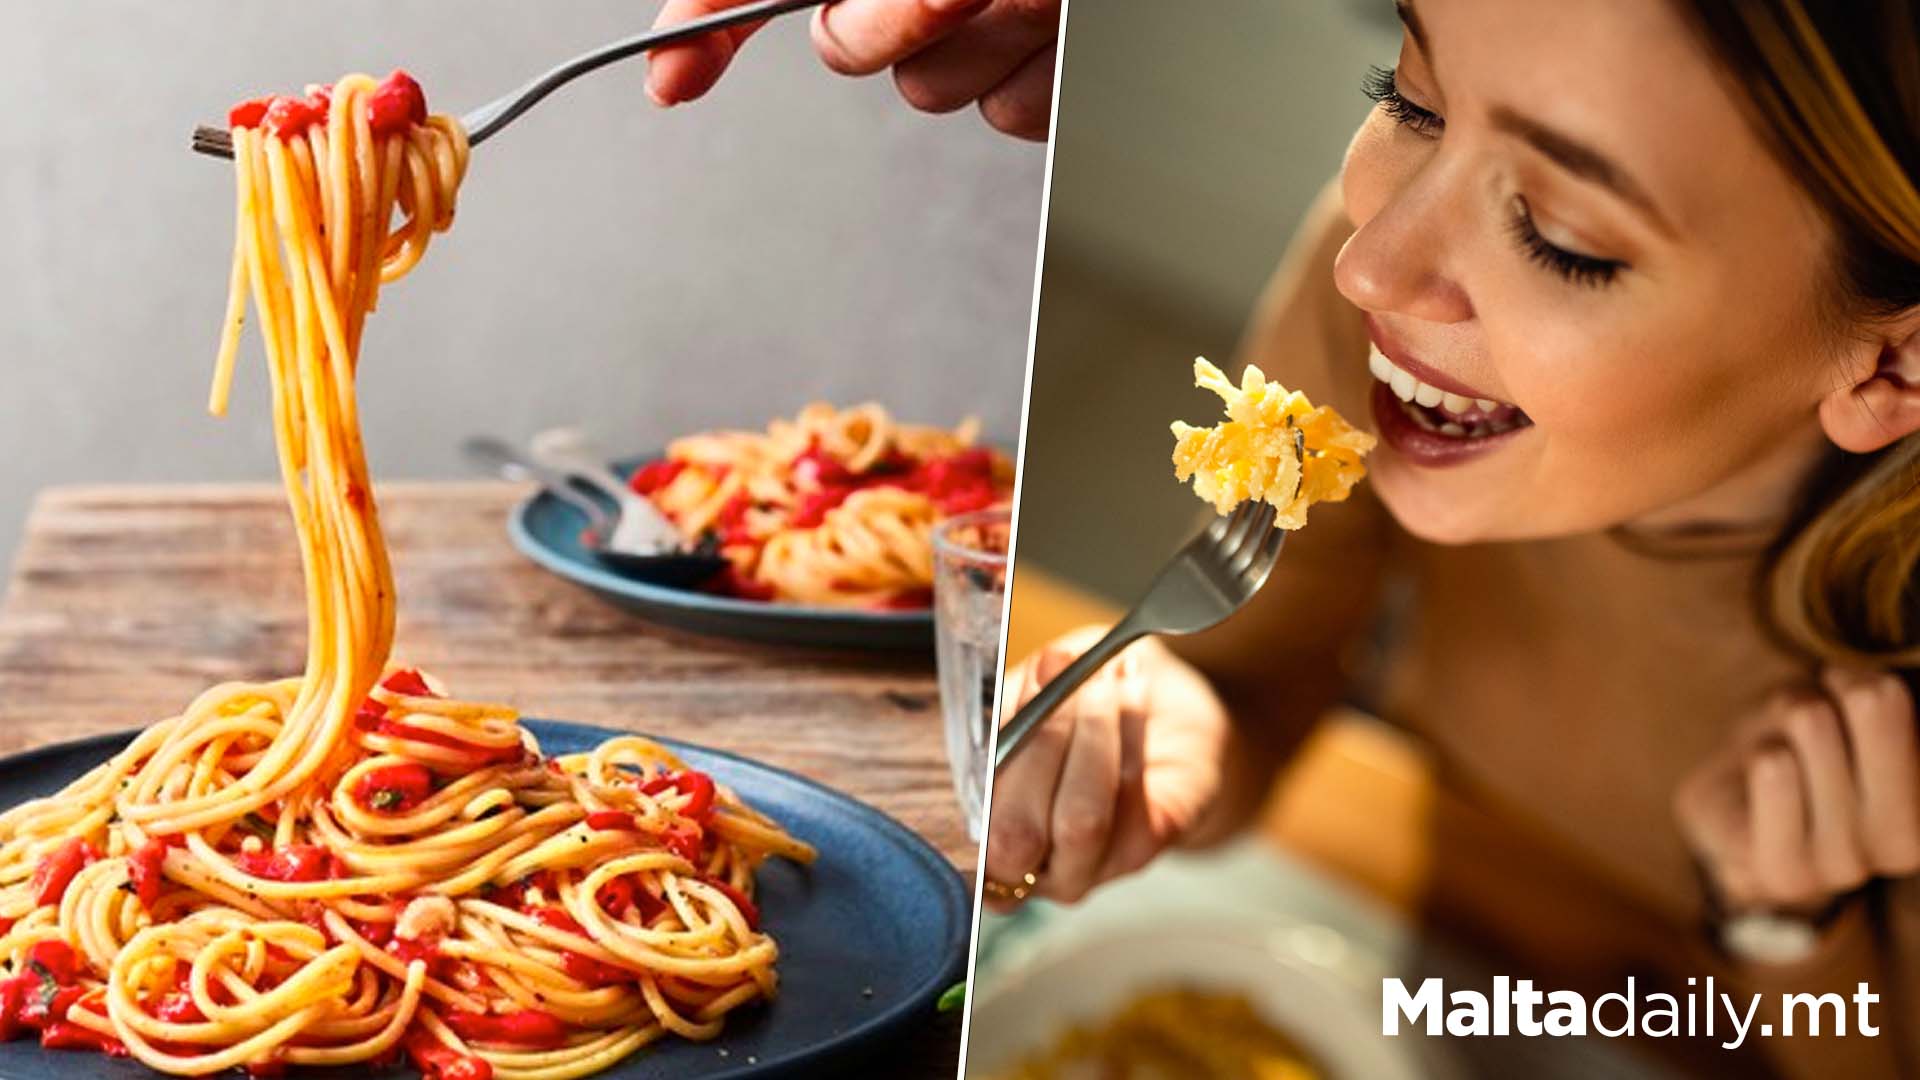 Eating Pasta Does Not Lead To Weight Gain, Study Finds